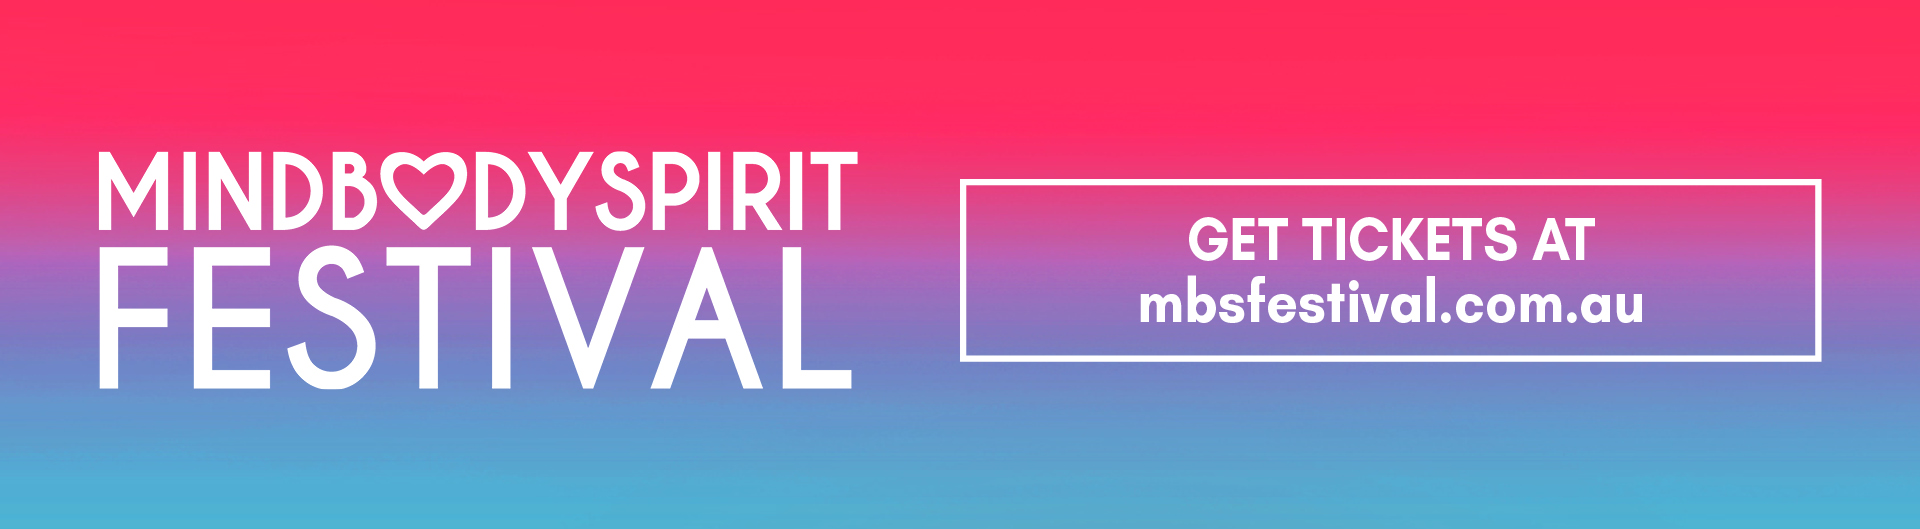 MindBodySpirit Festival is coming to ICC Sydney on 8 to 10 March 2024.